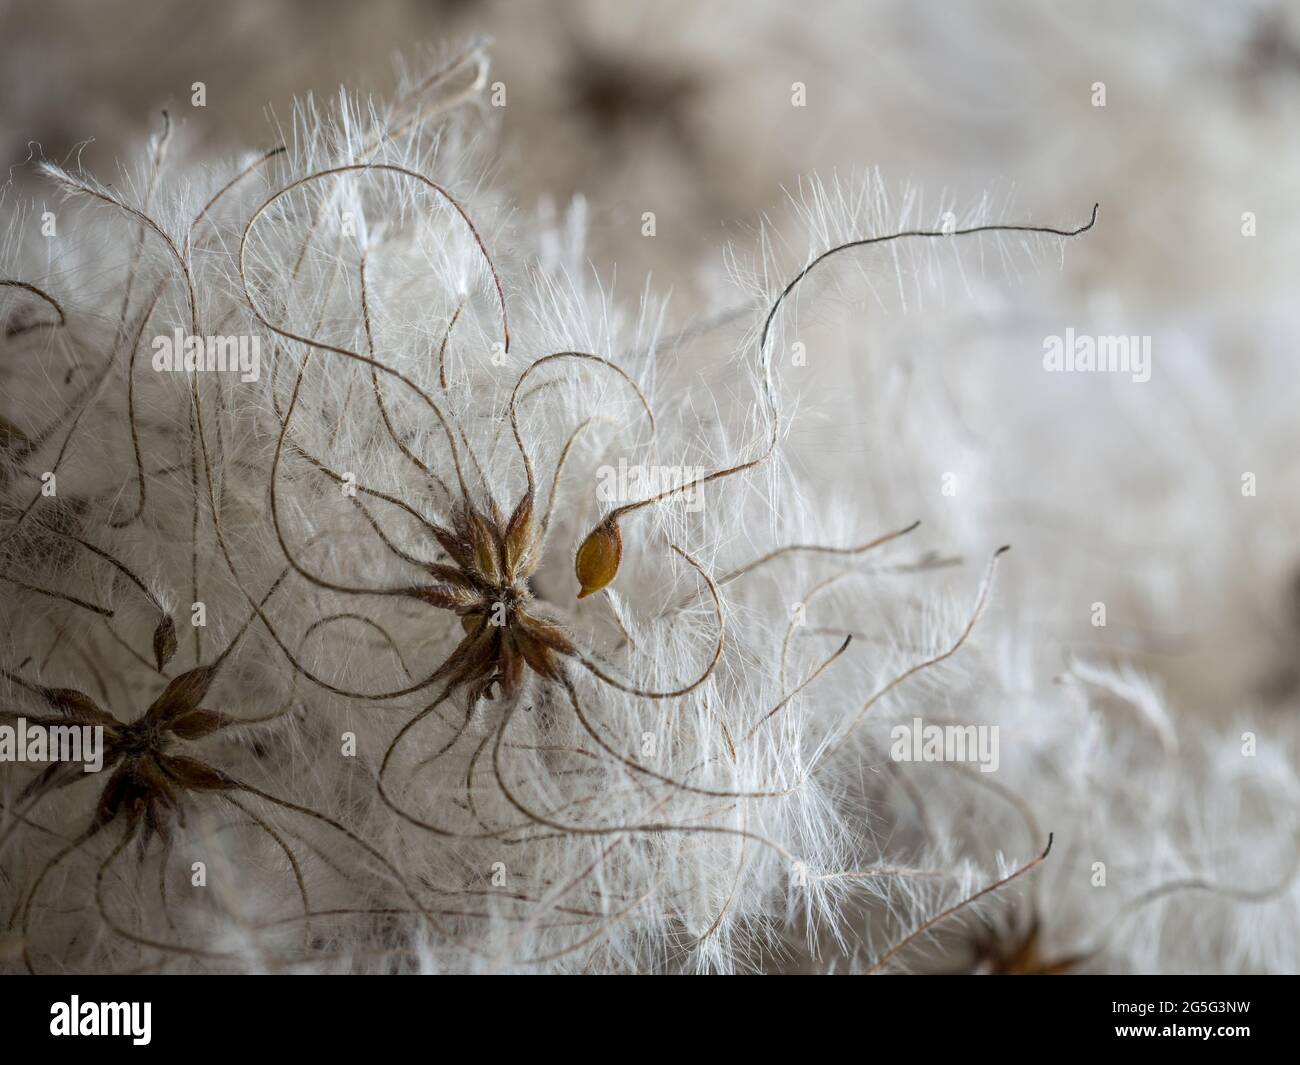 a full frame close up macro detail view of elegant delicate clemetis fluffly puffball seedhead seeds with flowing tendrills tails waving curling backl Stock Photo